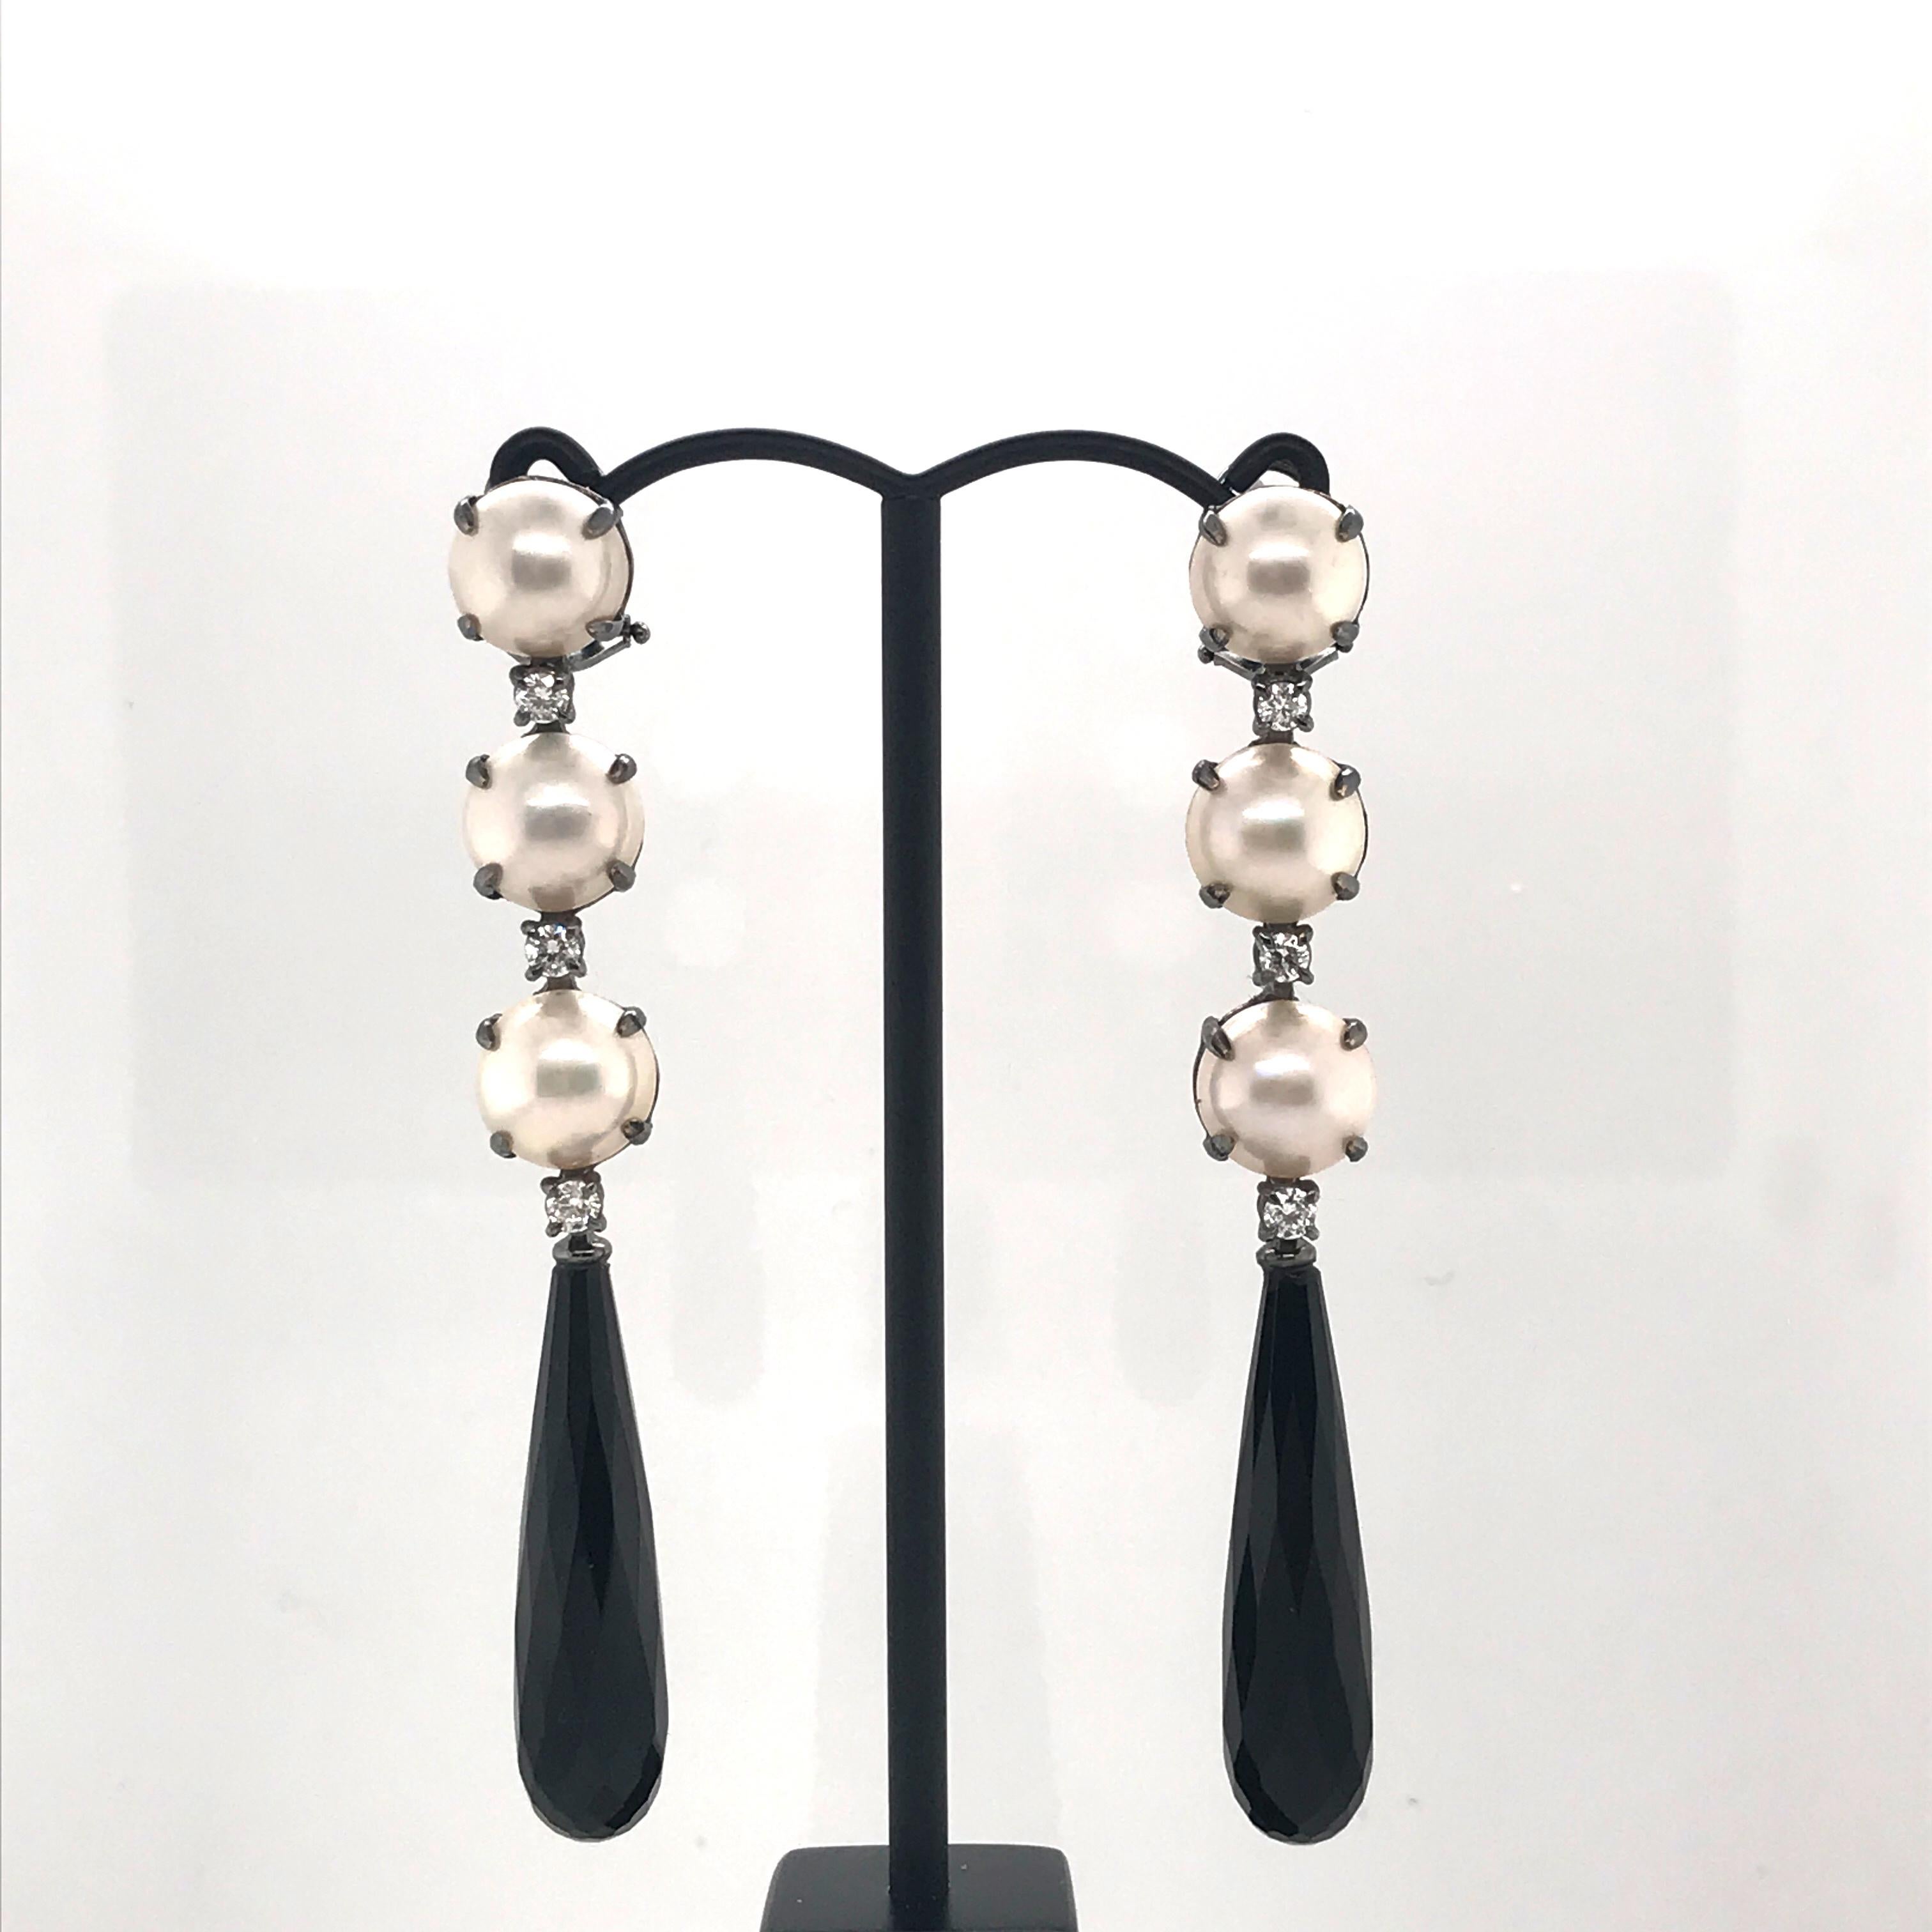 At the top of these earrings are three magnificent South Sea pearls, mabe pearls that evoke the mysteries and purity of the ocean. Their natural brilliance and generous size add a touch of grace and sophistication to this unique piece.

Accentuating